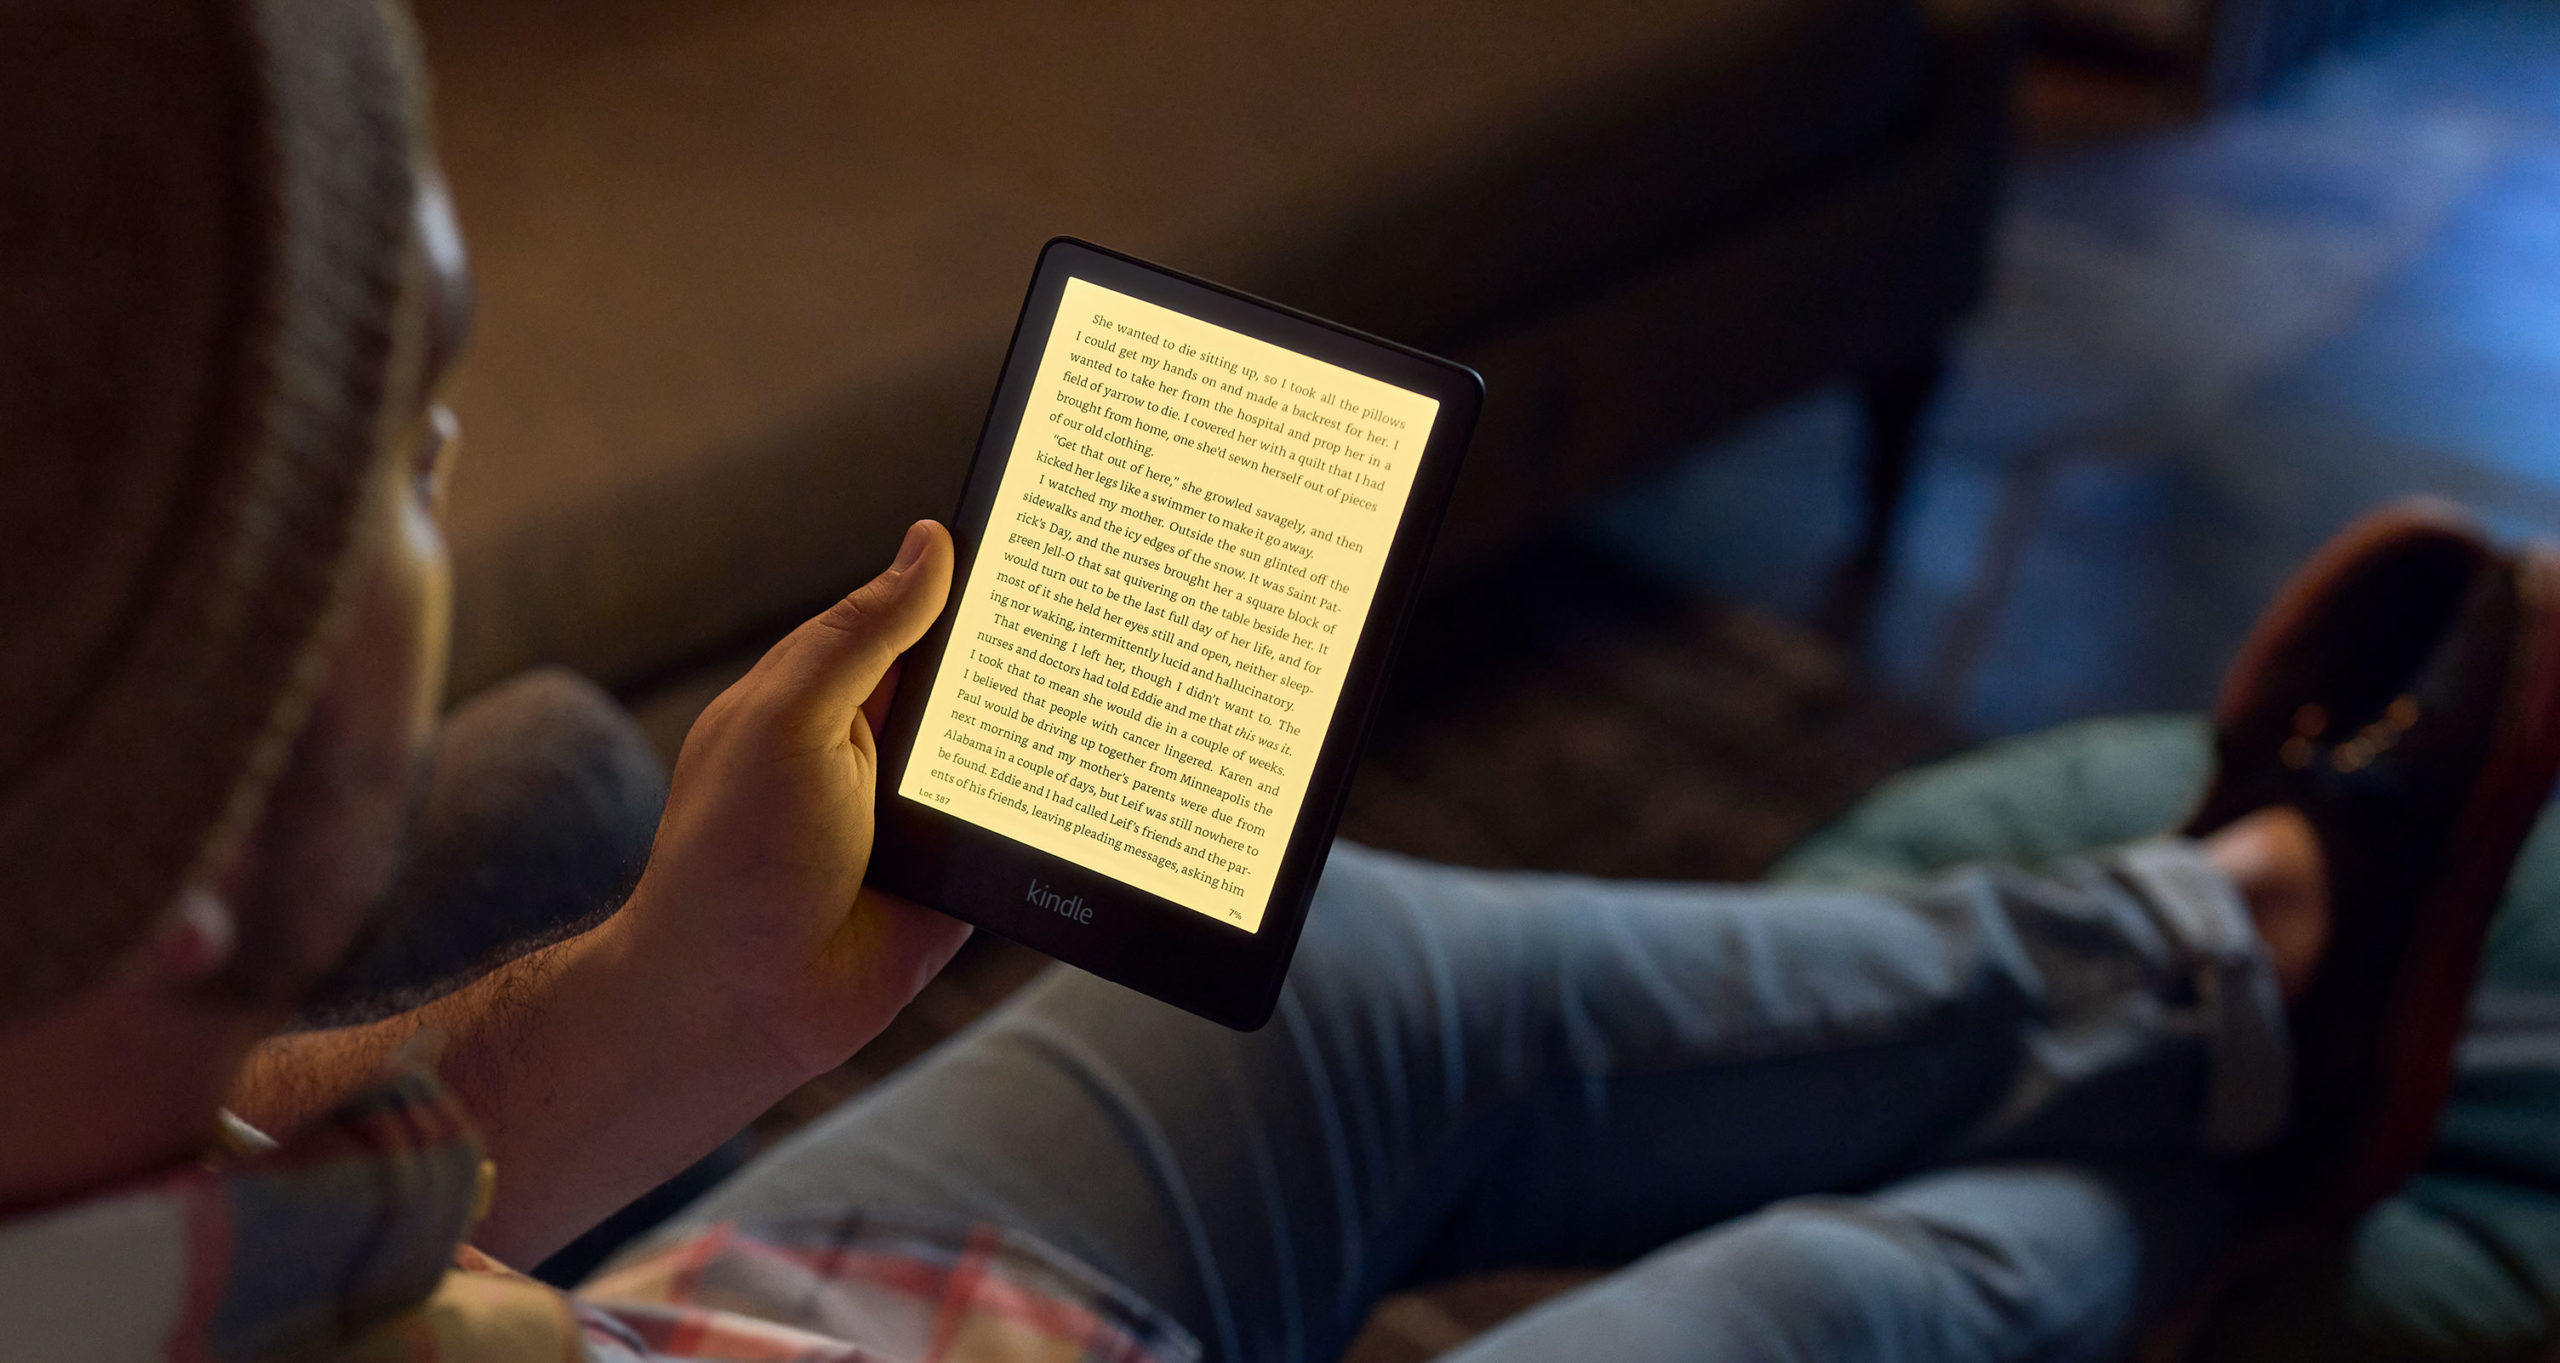 The Paperwhite is the latest in Amazon’s long-standing Kindle line that serves as your personal, portable library.